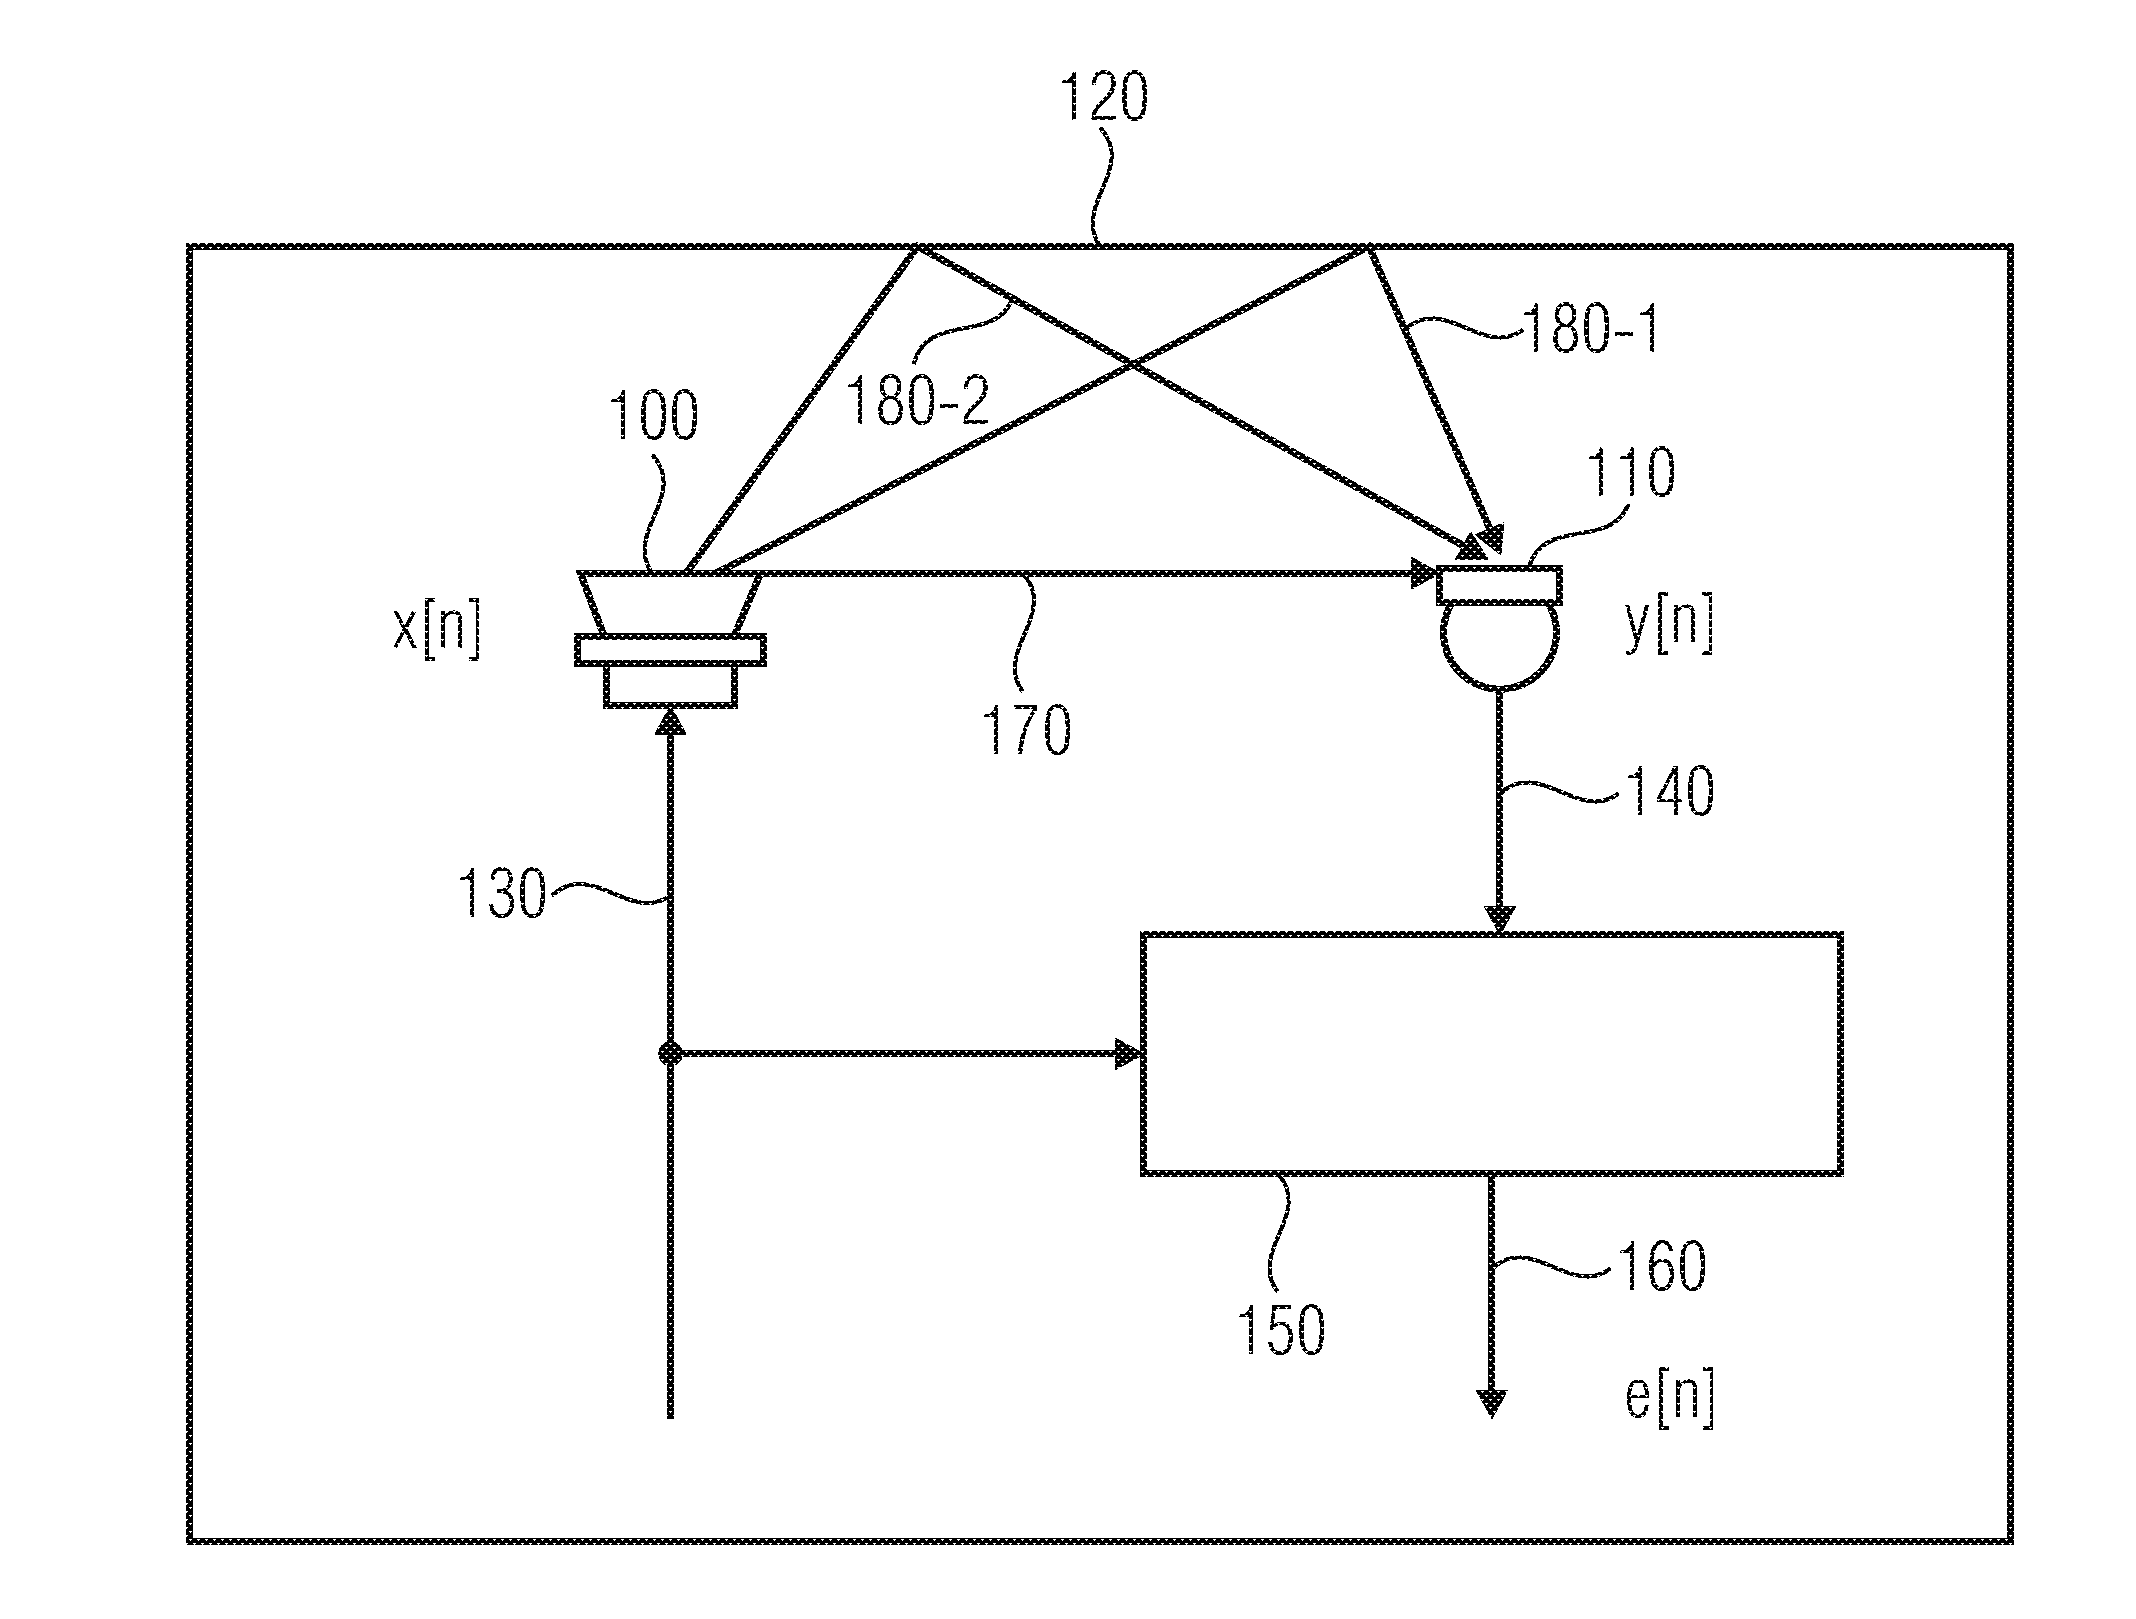 Echo suppression comprising modeling of late reverberation components